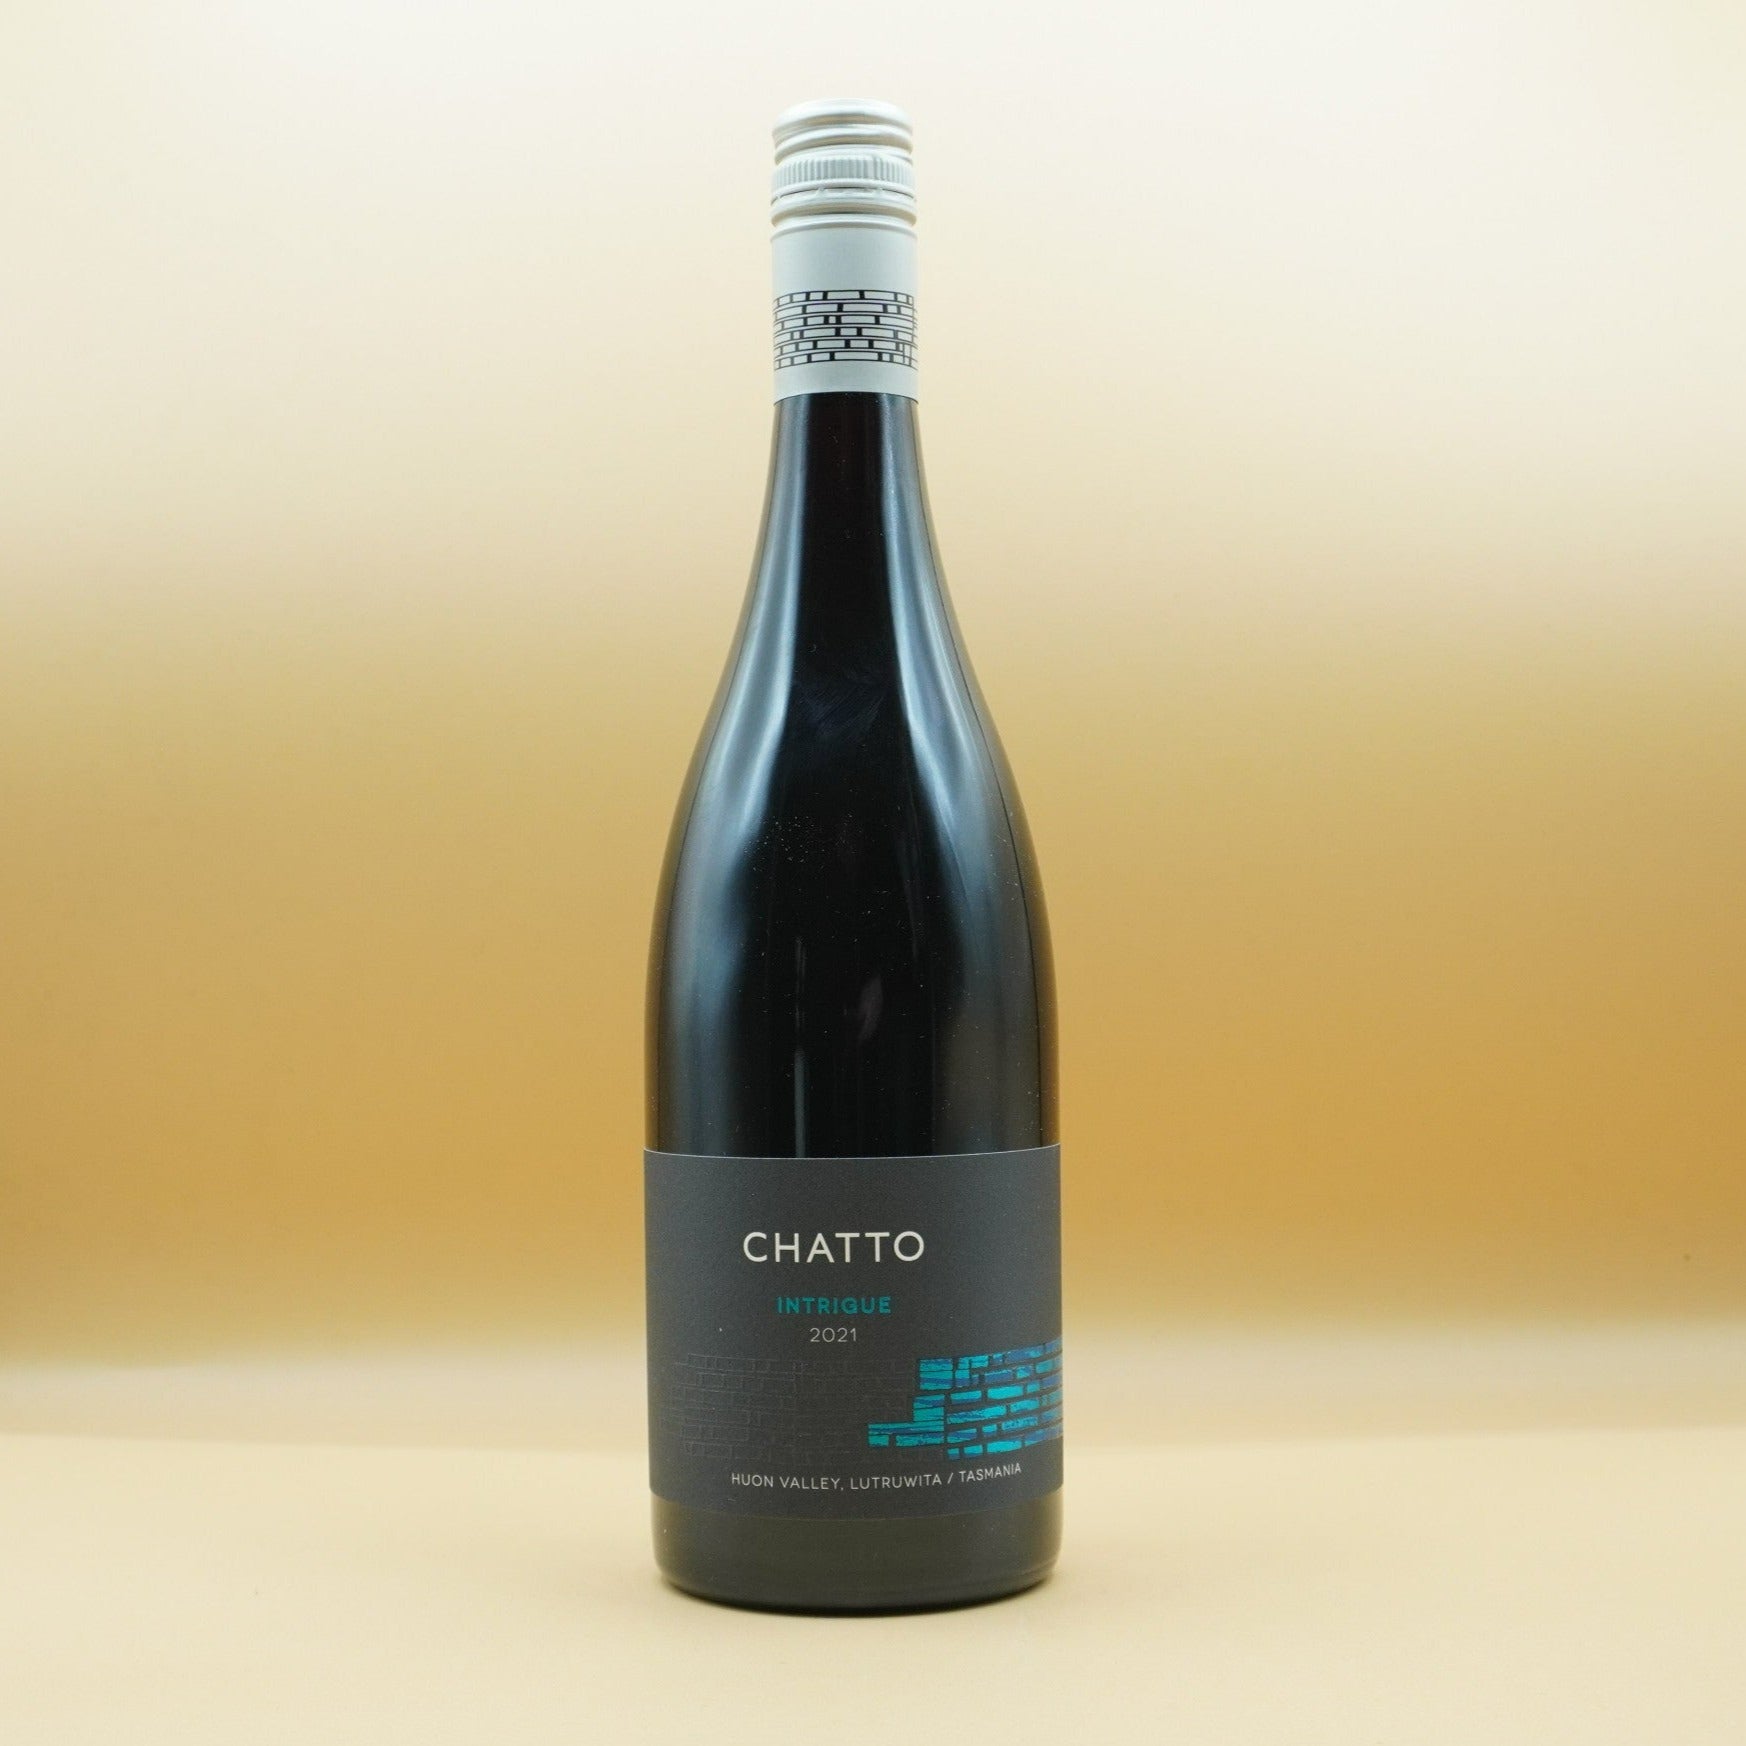 Chatto, Intrigue Pinot Noir 2021